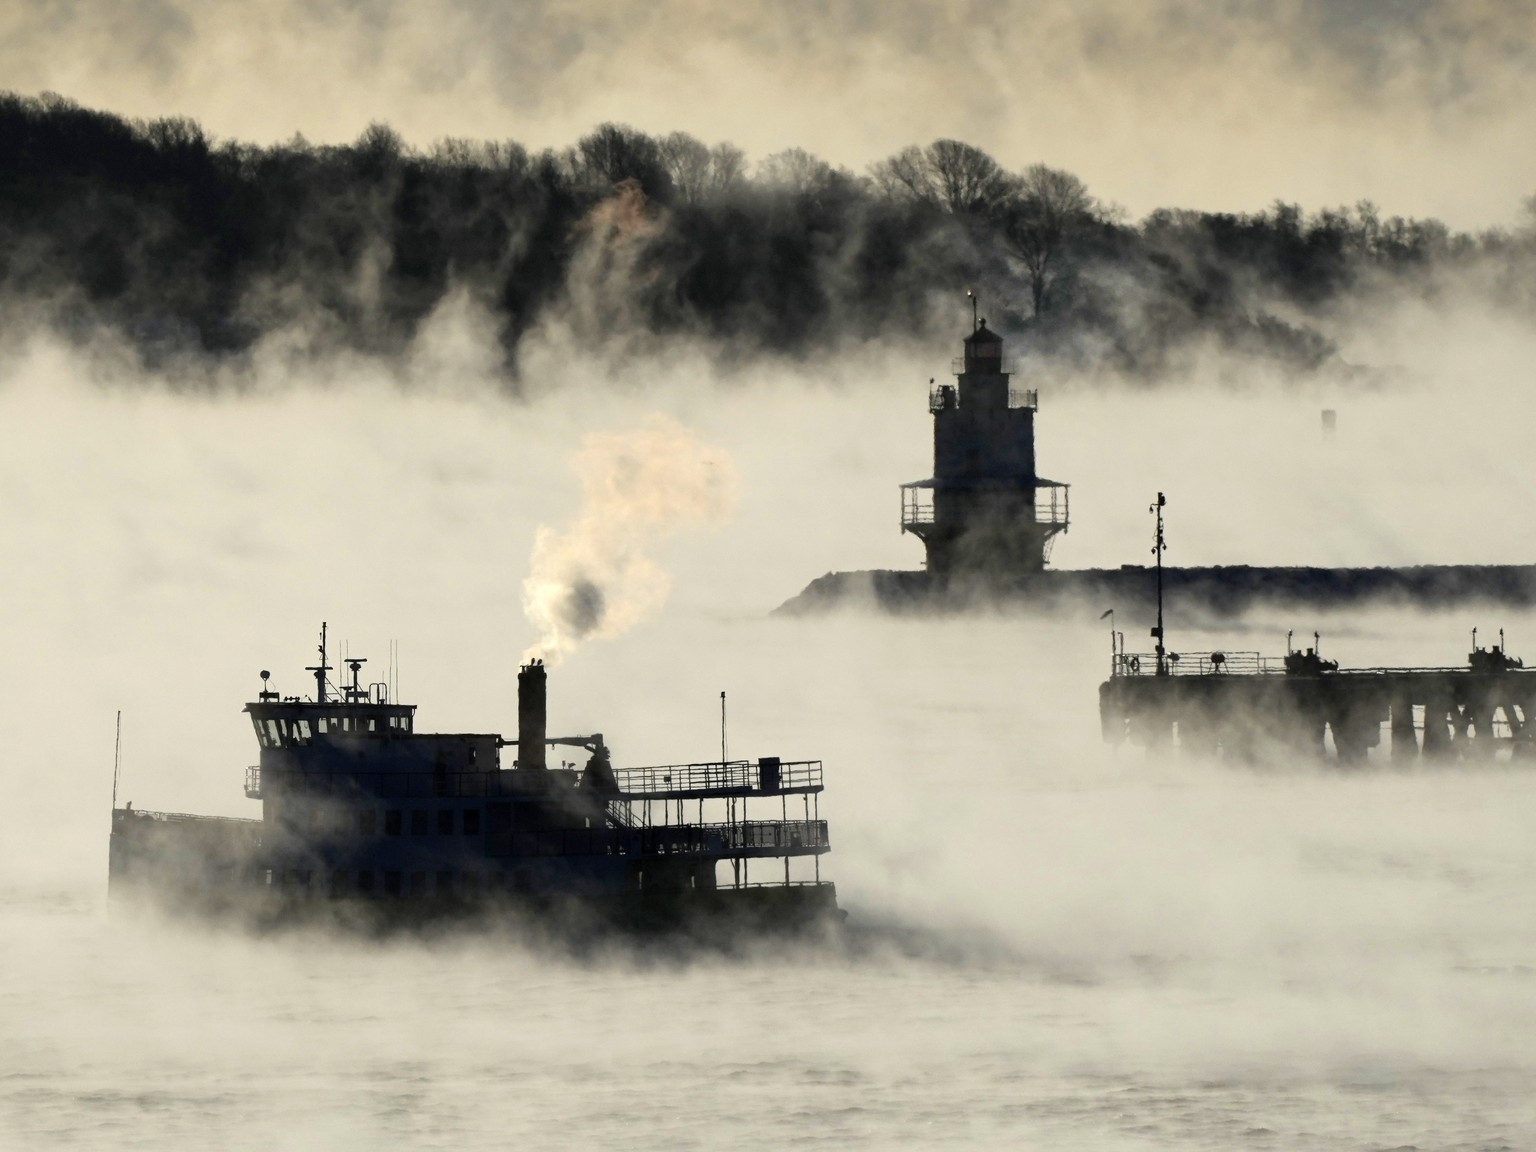 Arctic sea smoke rises from the the Atlantic Ocean as a passenger ferry passes Spring Point Ledge Light, Saturday, Feb. 4, 2023, off the coast of South Portland, Maine. The morning temperature was abo ...